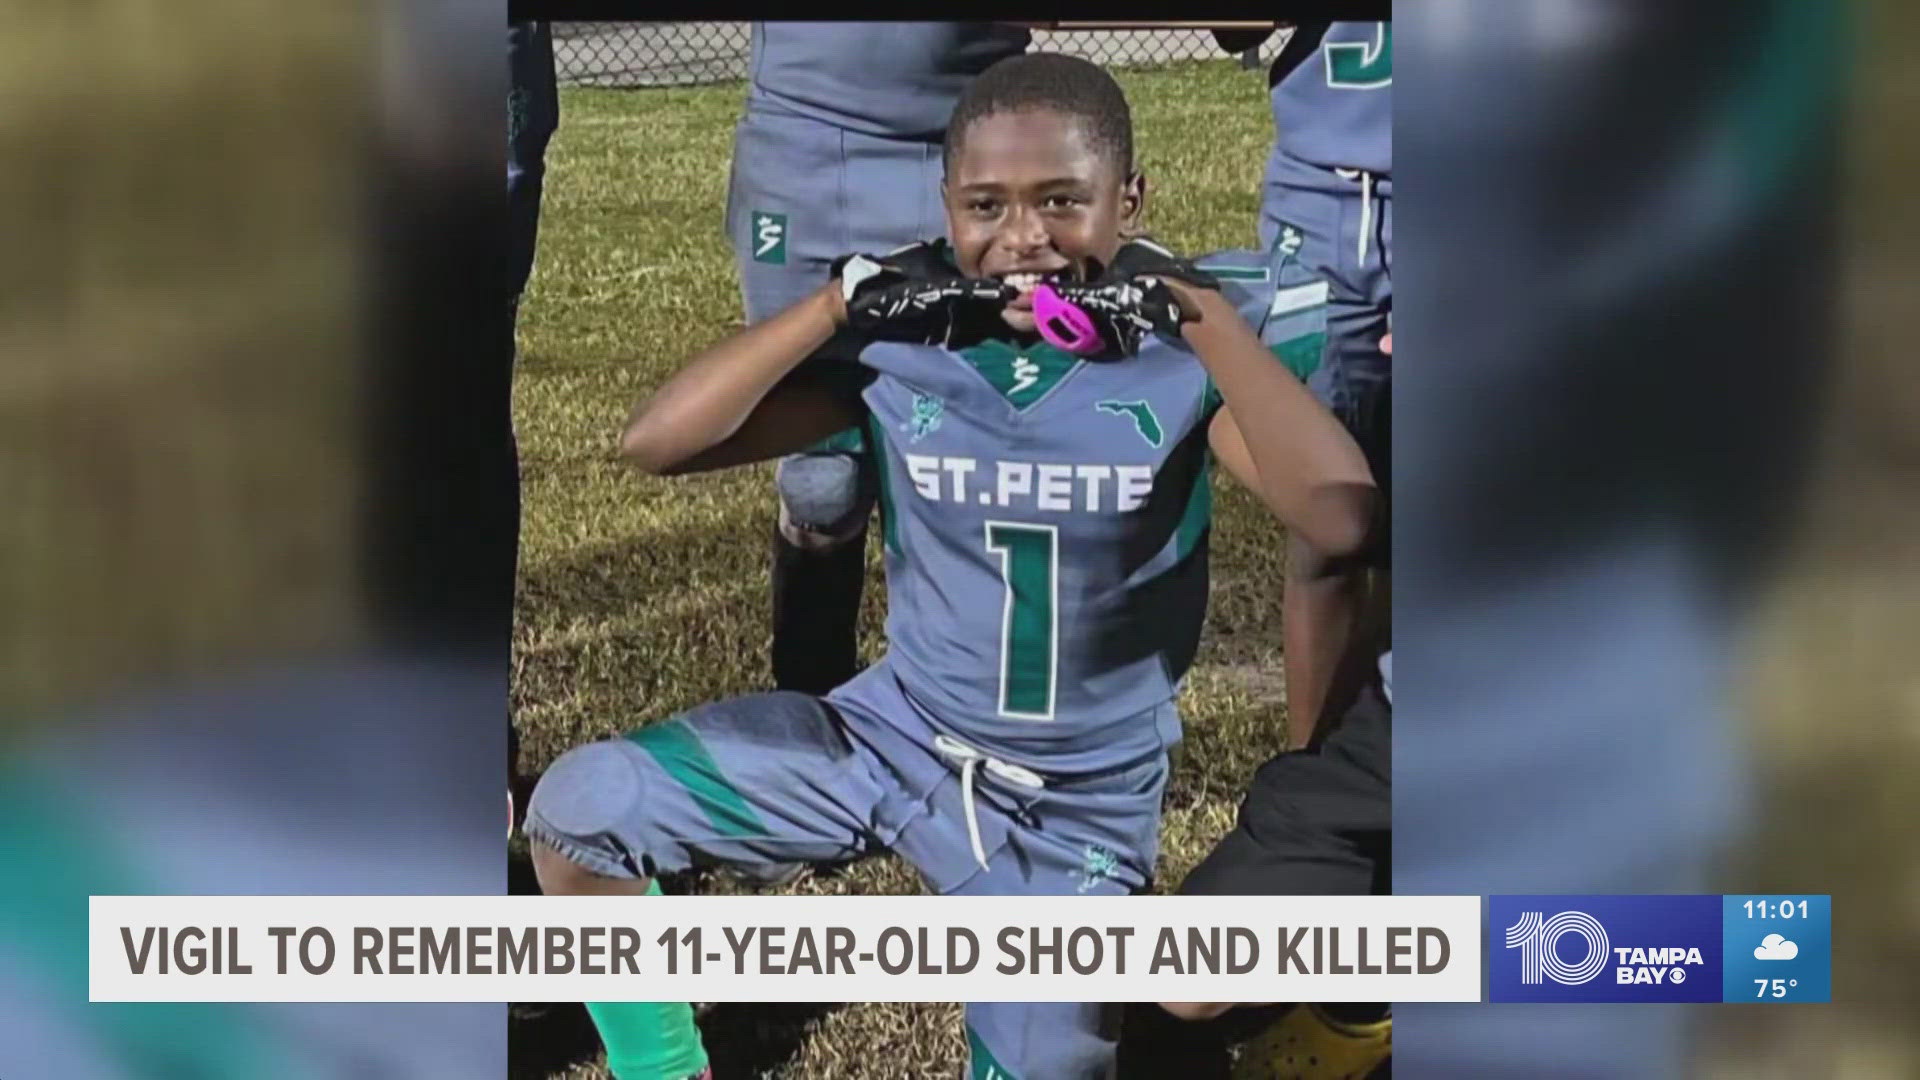 Amir Williams was accidentally shot and killed by his 14-year-old brother on Friday.